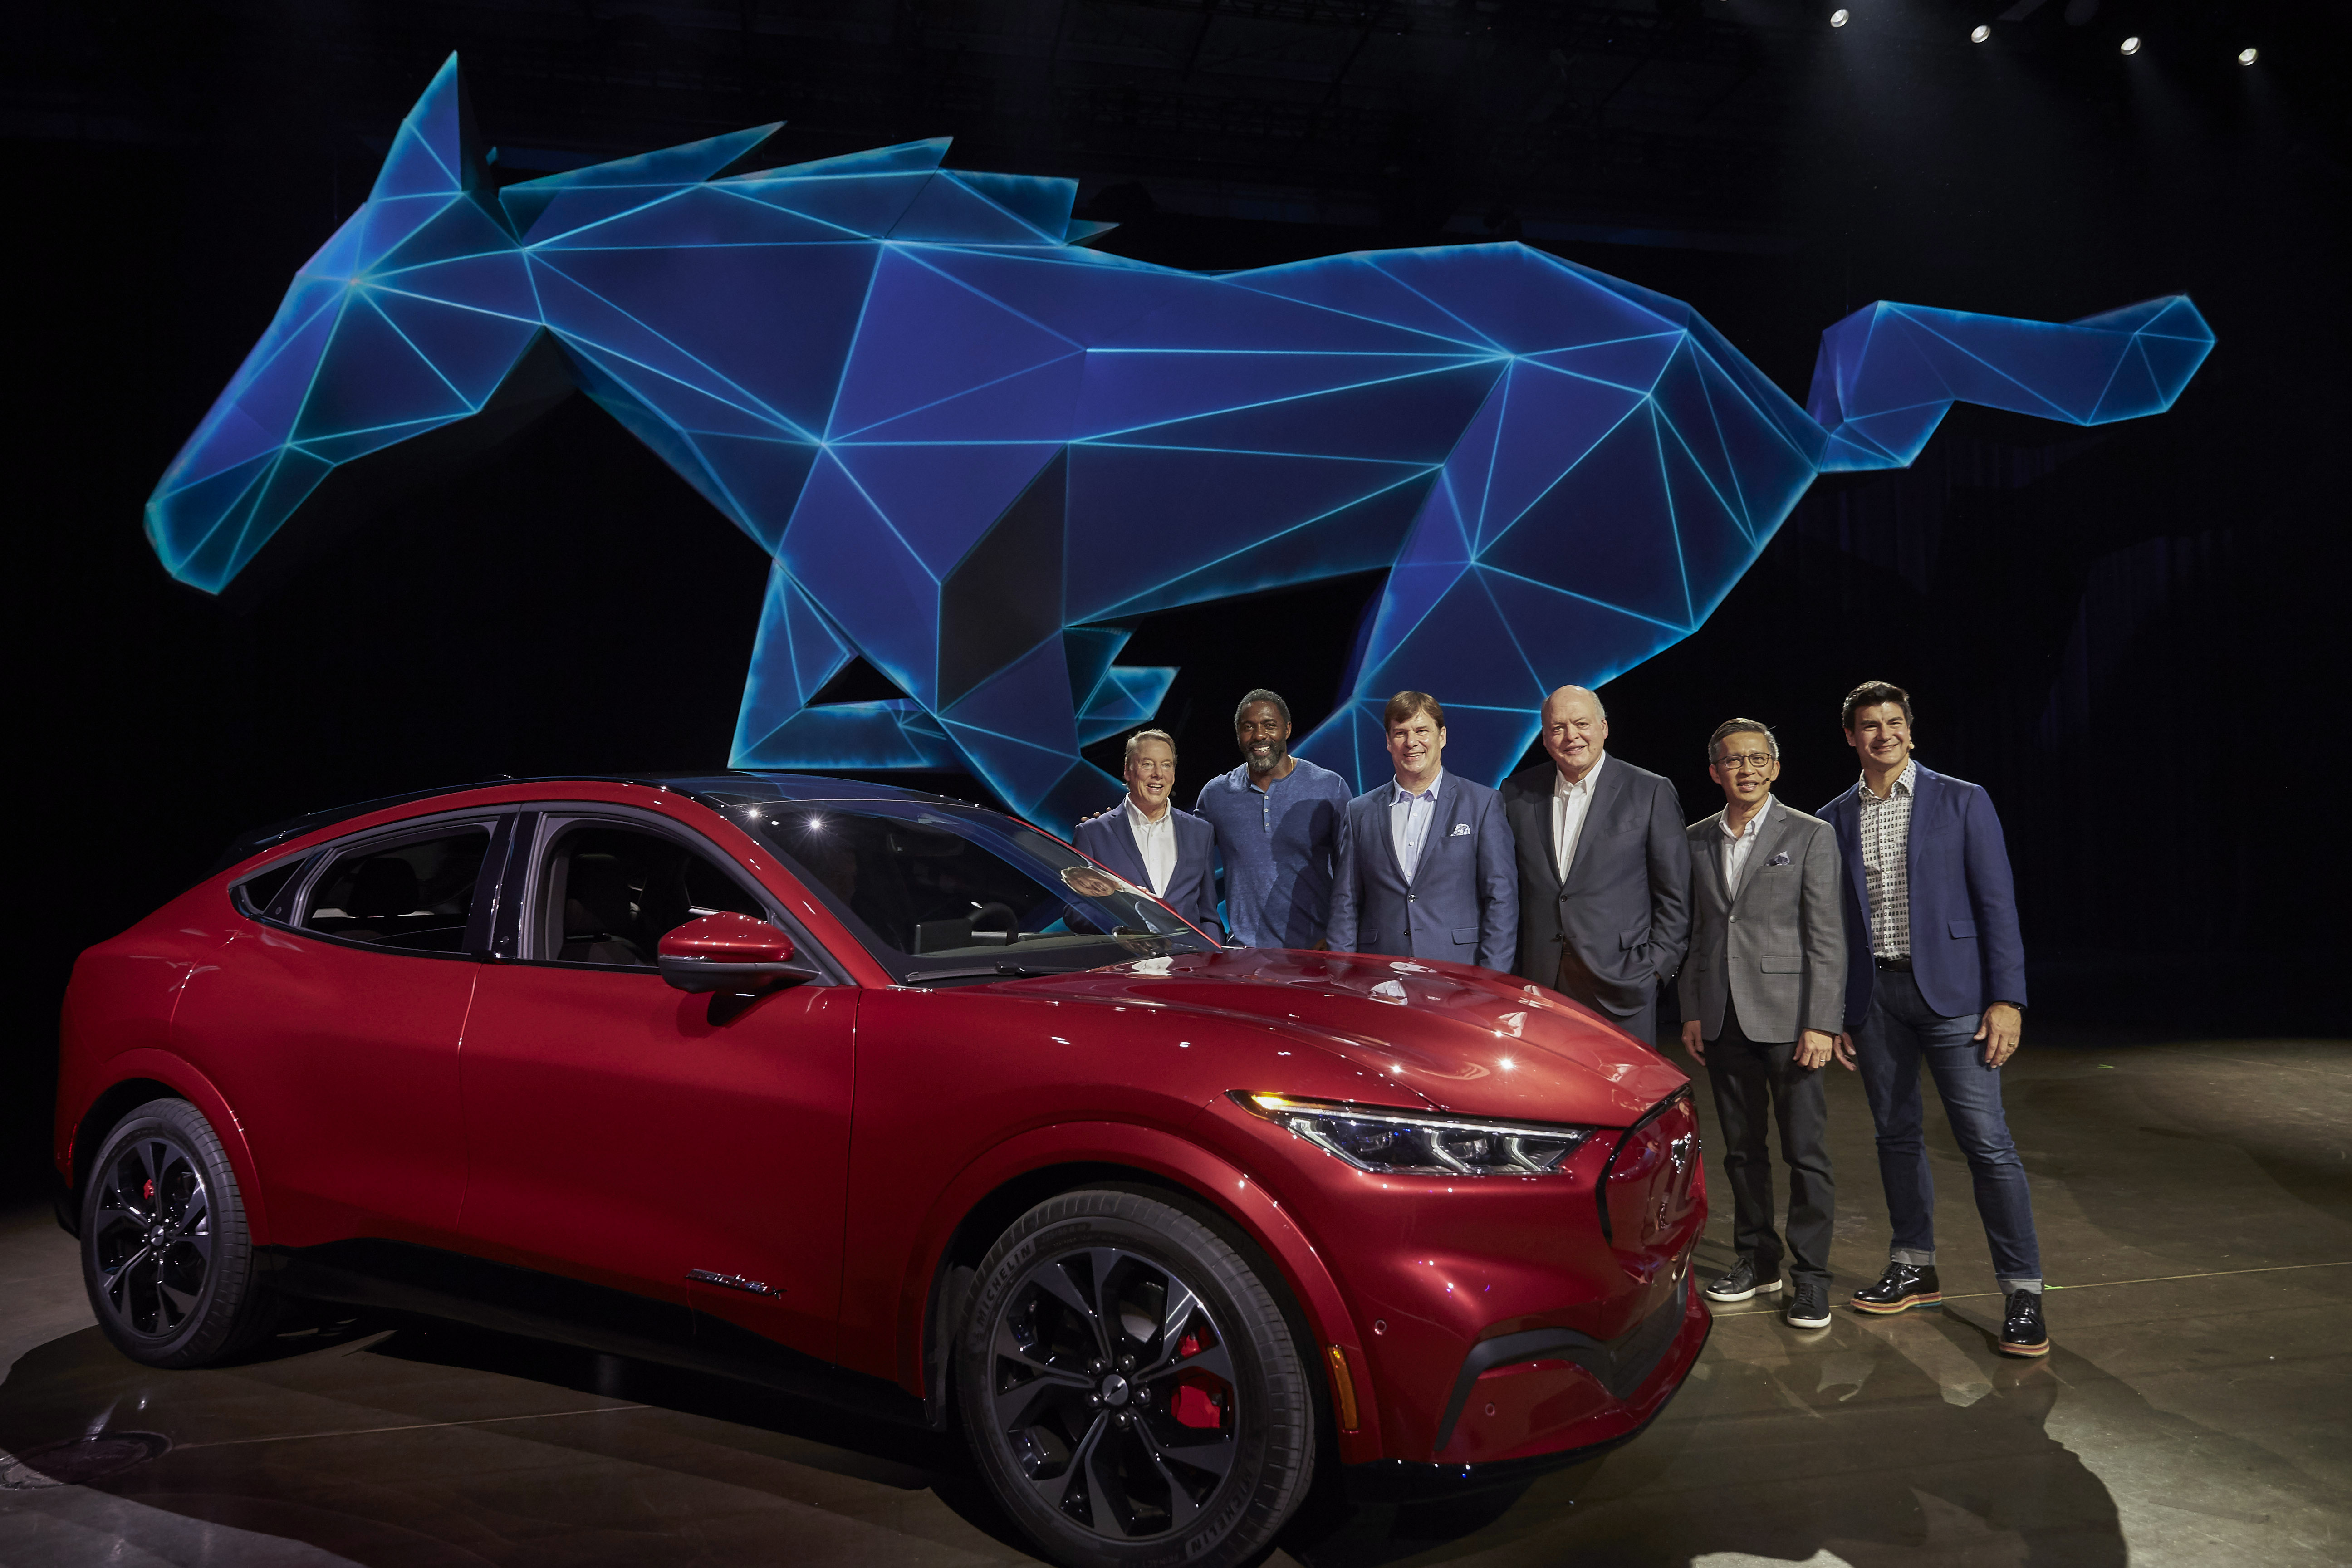 From left, Ford Executive Chairman Bill Ford, actor Idris Elba, COO Jim Farley, CEO Jim Hackett, Ford Chief Product Development Officer Hau-Thai Tang and Director for Global Electrification Ted Cannis at the reveal of the all-electric Ford Mustang Mach-E.